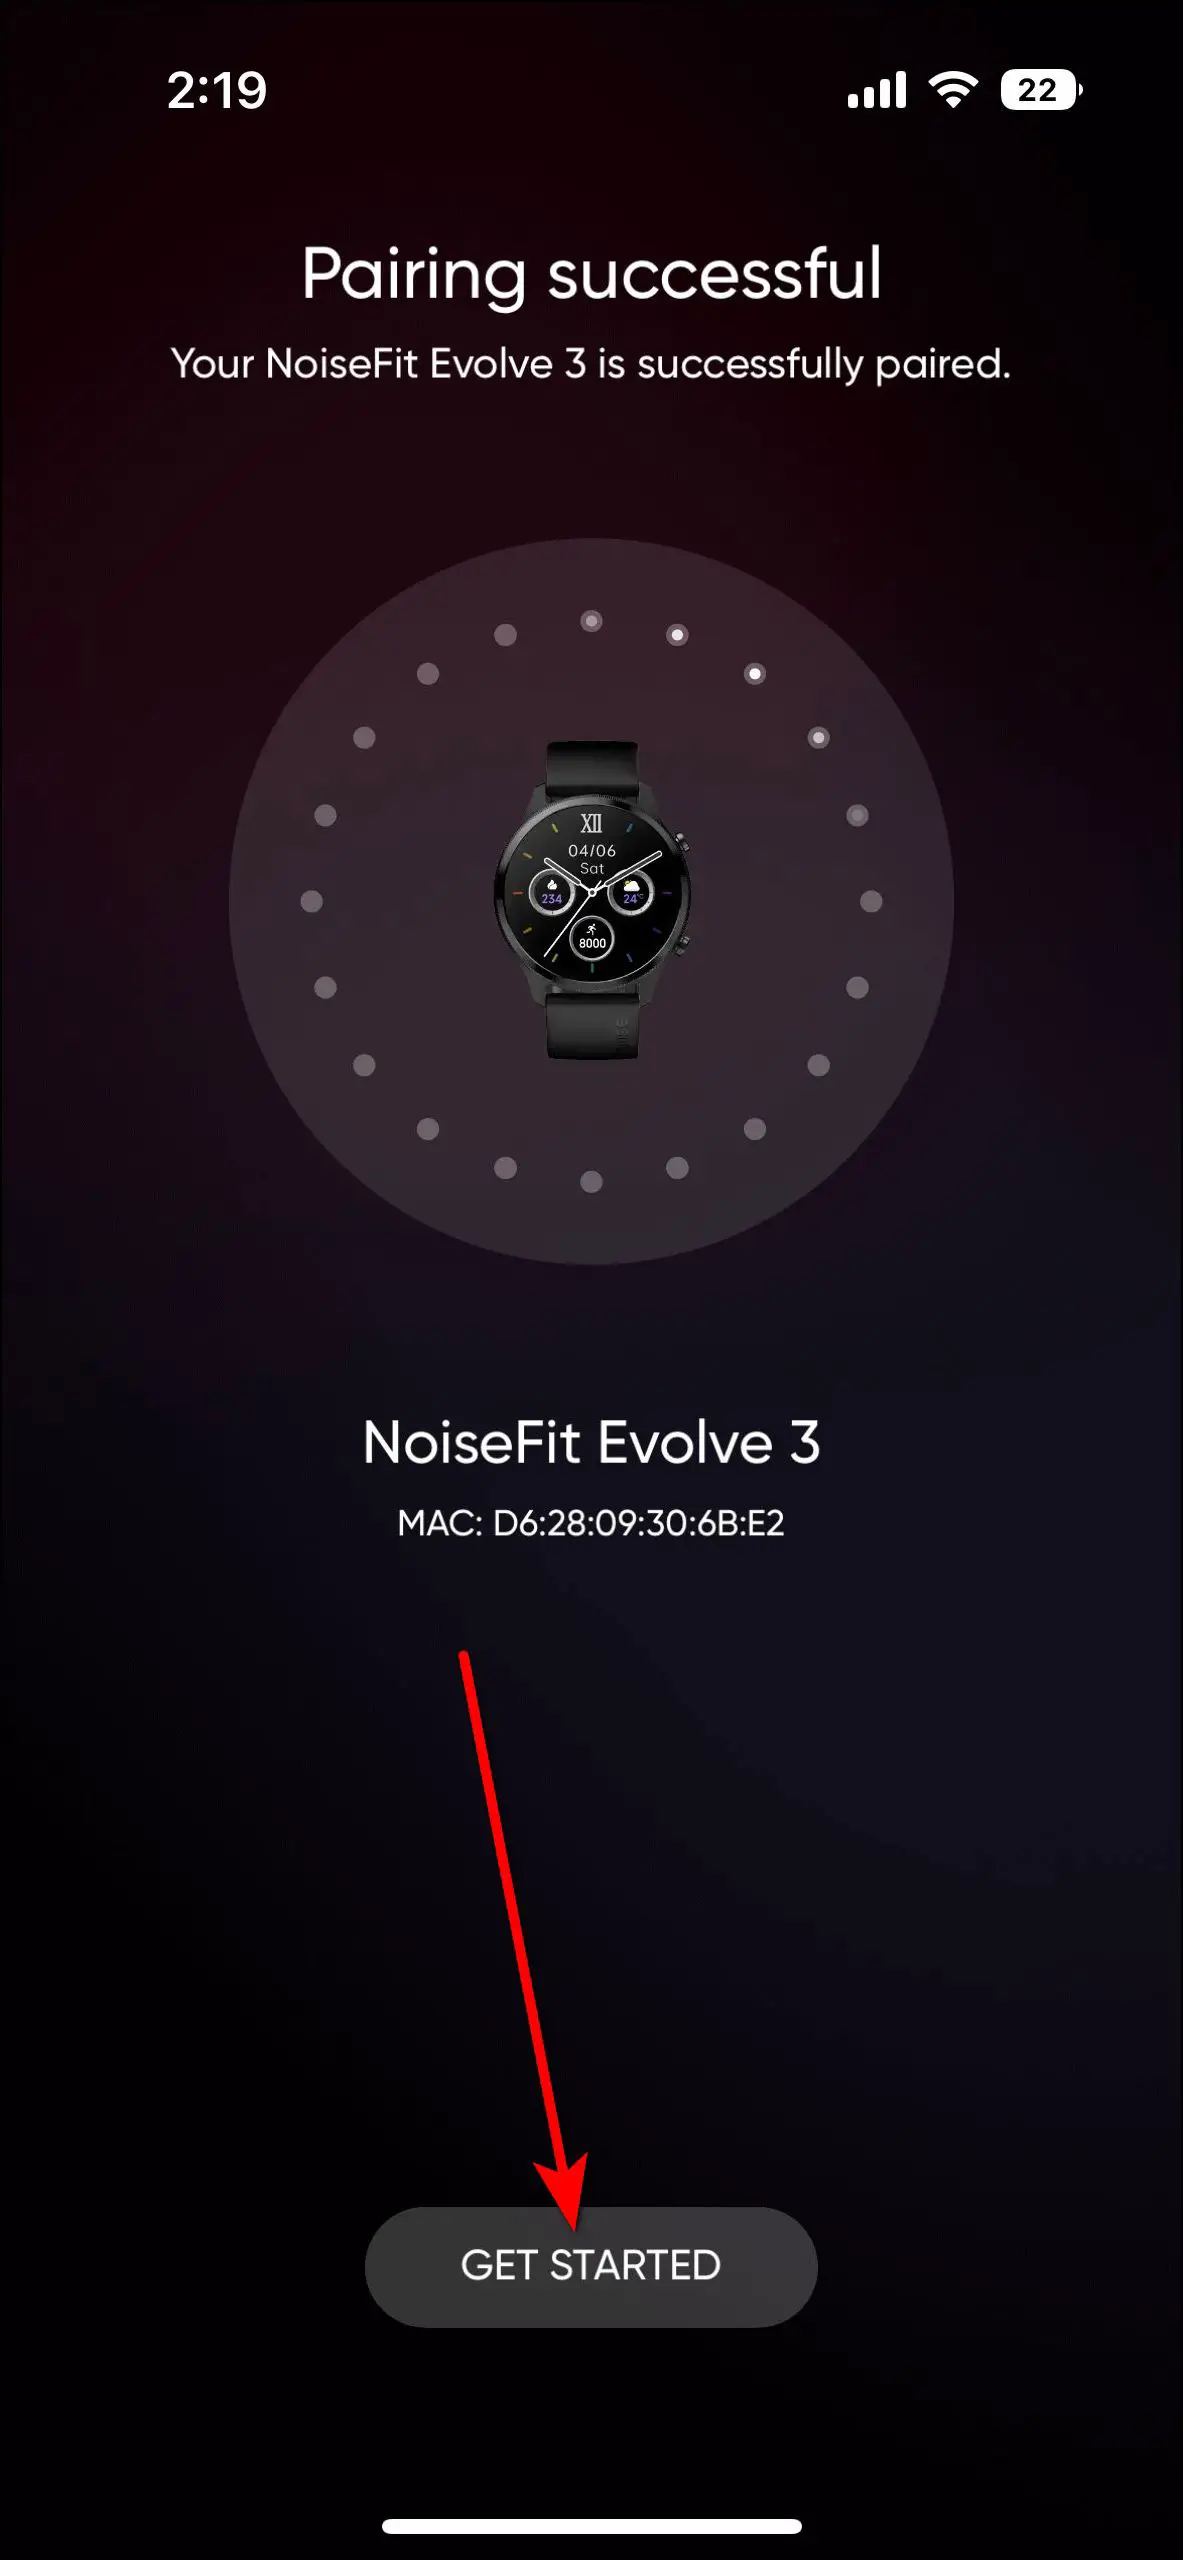 Connect NoiseFit Evolve 3 with iPhone